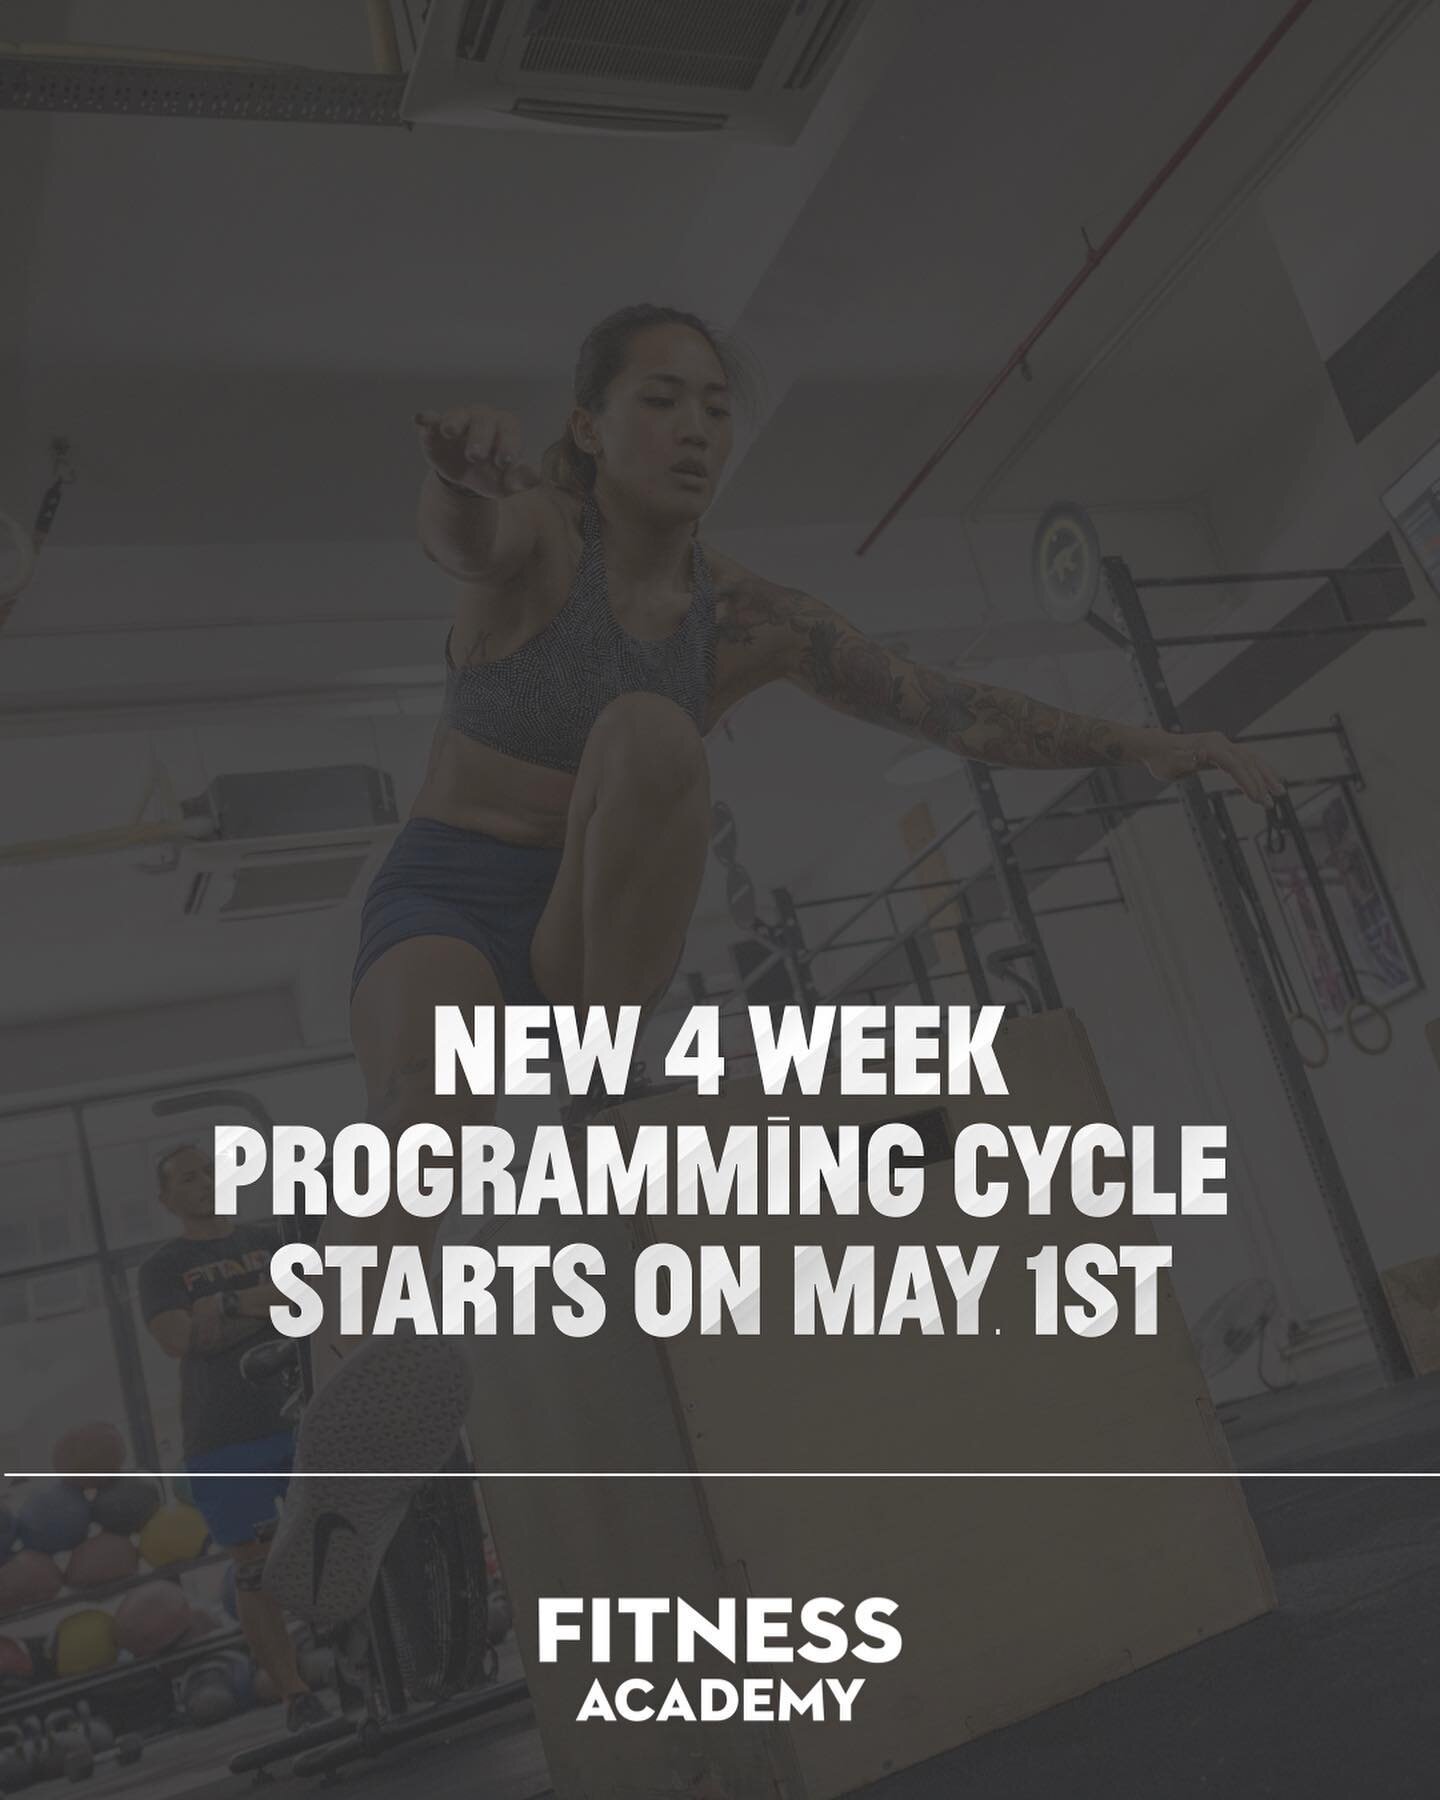 🔥 Our new 4-Week CrossFit programming cycle starts today (May 1st) 🔥

Here's what to expect each day of the week:

🦵 Mondays: 
Single Leg Work to build unilateral lower body strength in quads, glute, hamstrings, obliques

🤸 Tuesdays: 
Building po